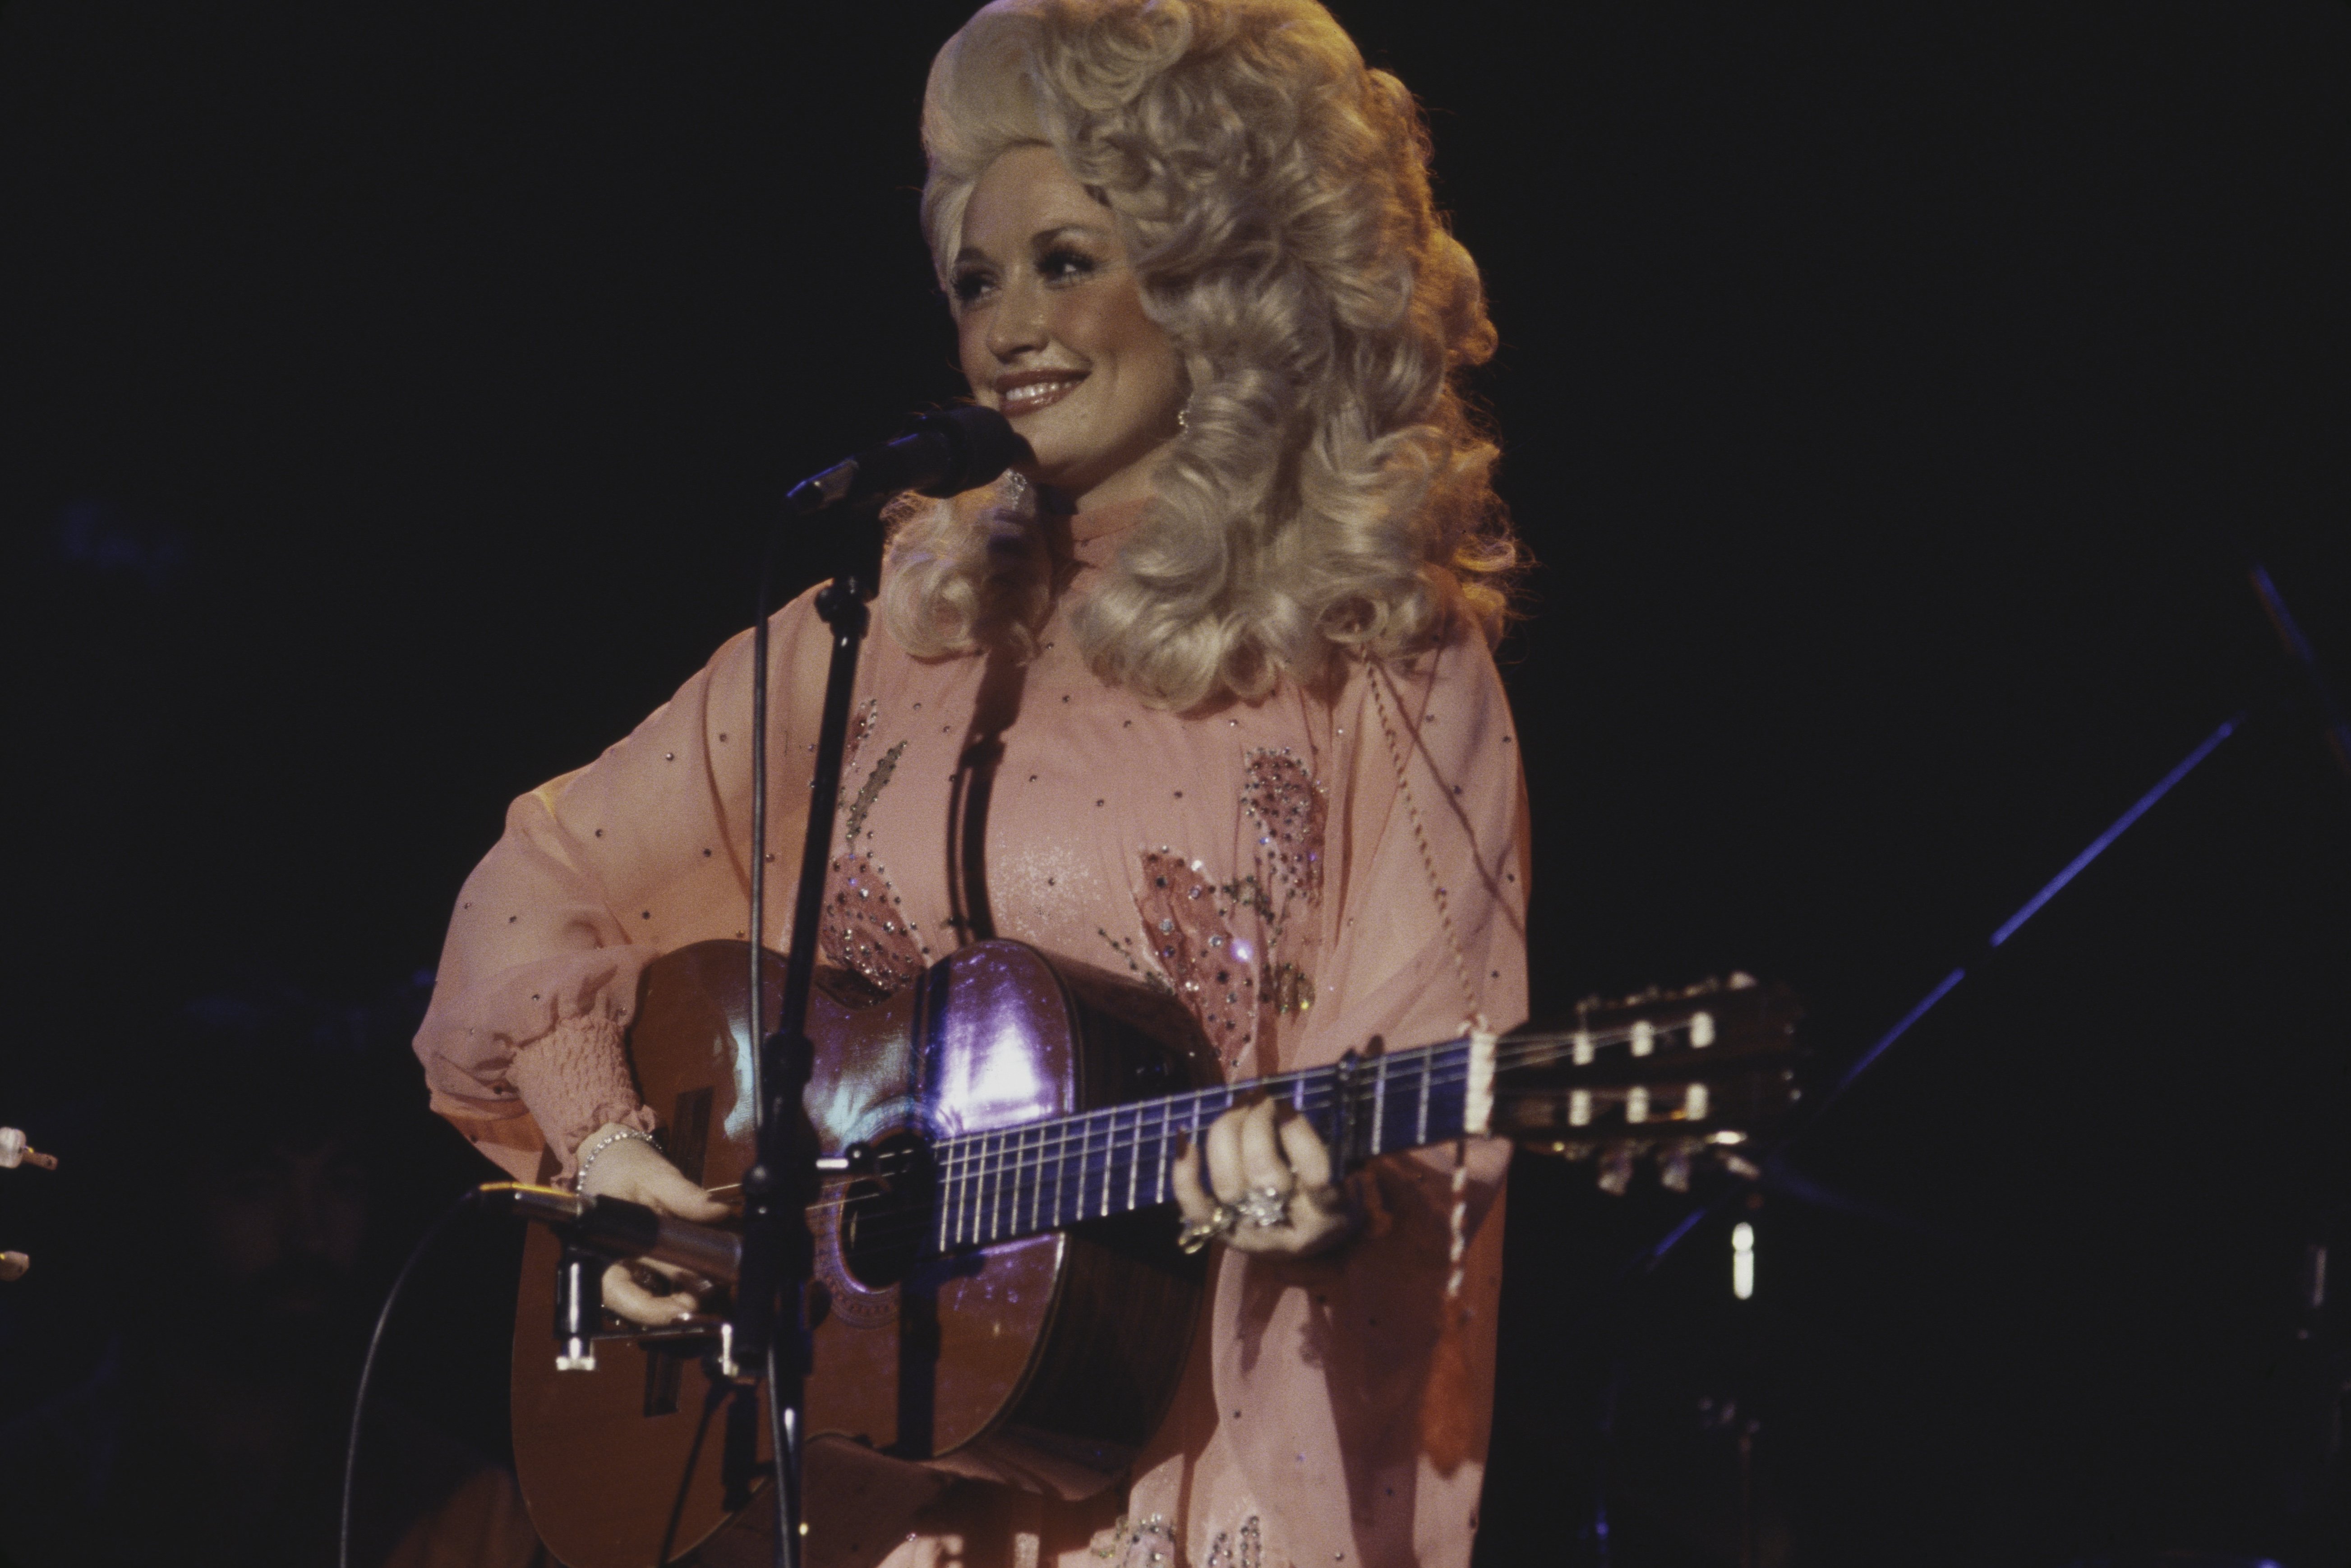  Dolly Parton performs live on stage at the Bottom Line club in New York on 11th May 1977. | Photo: GettyImages